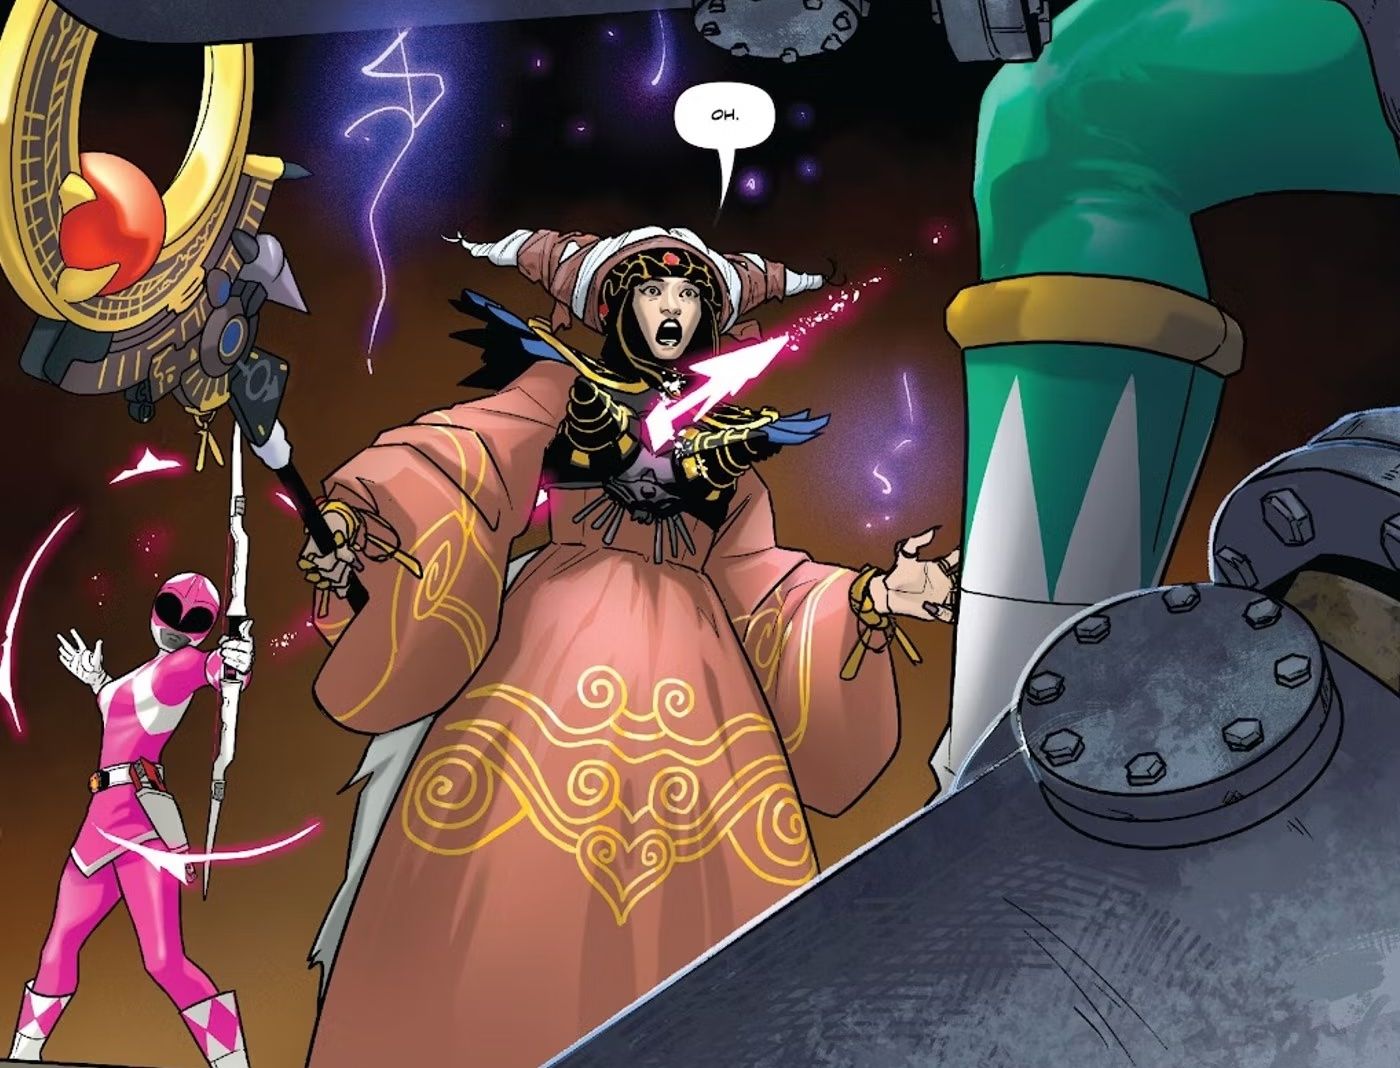 Rita Repulsa is shot in the back by the Pink Ranger